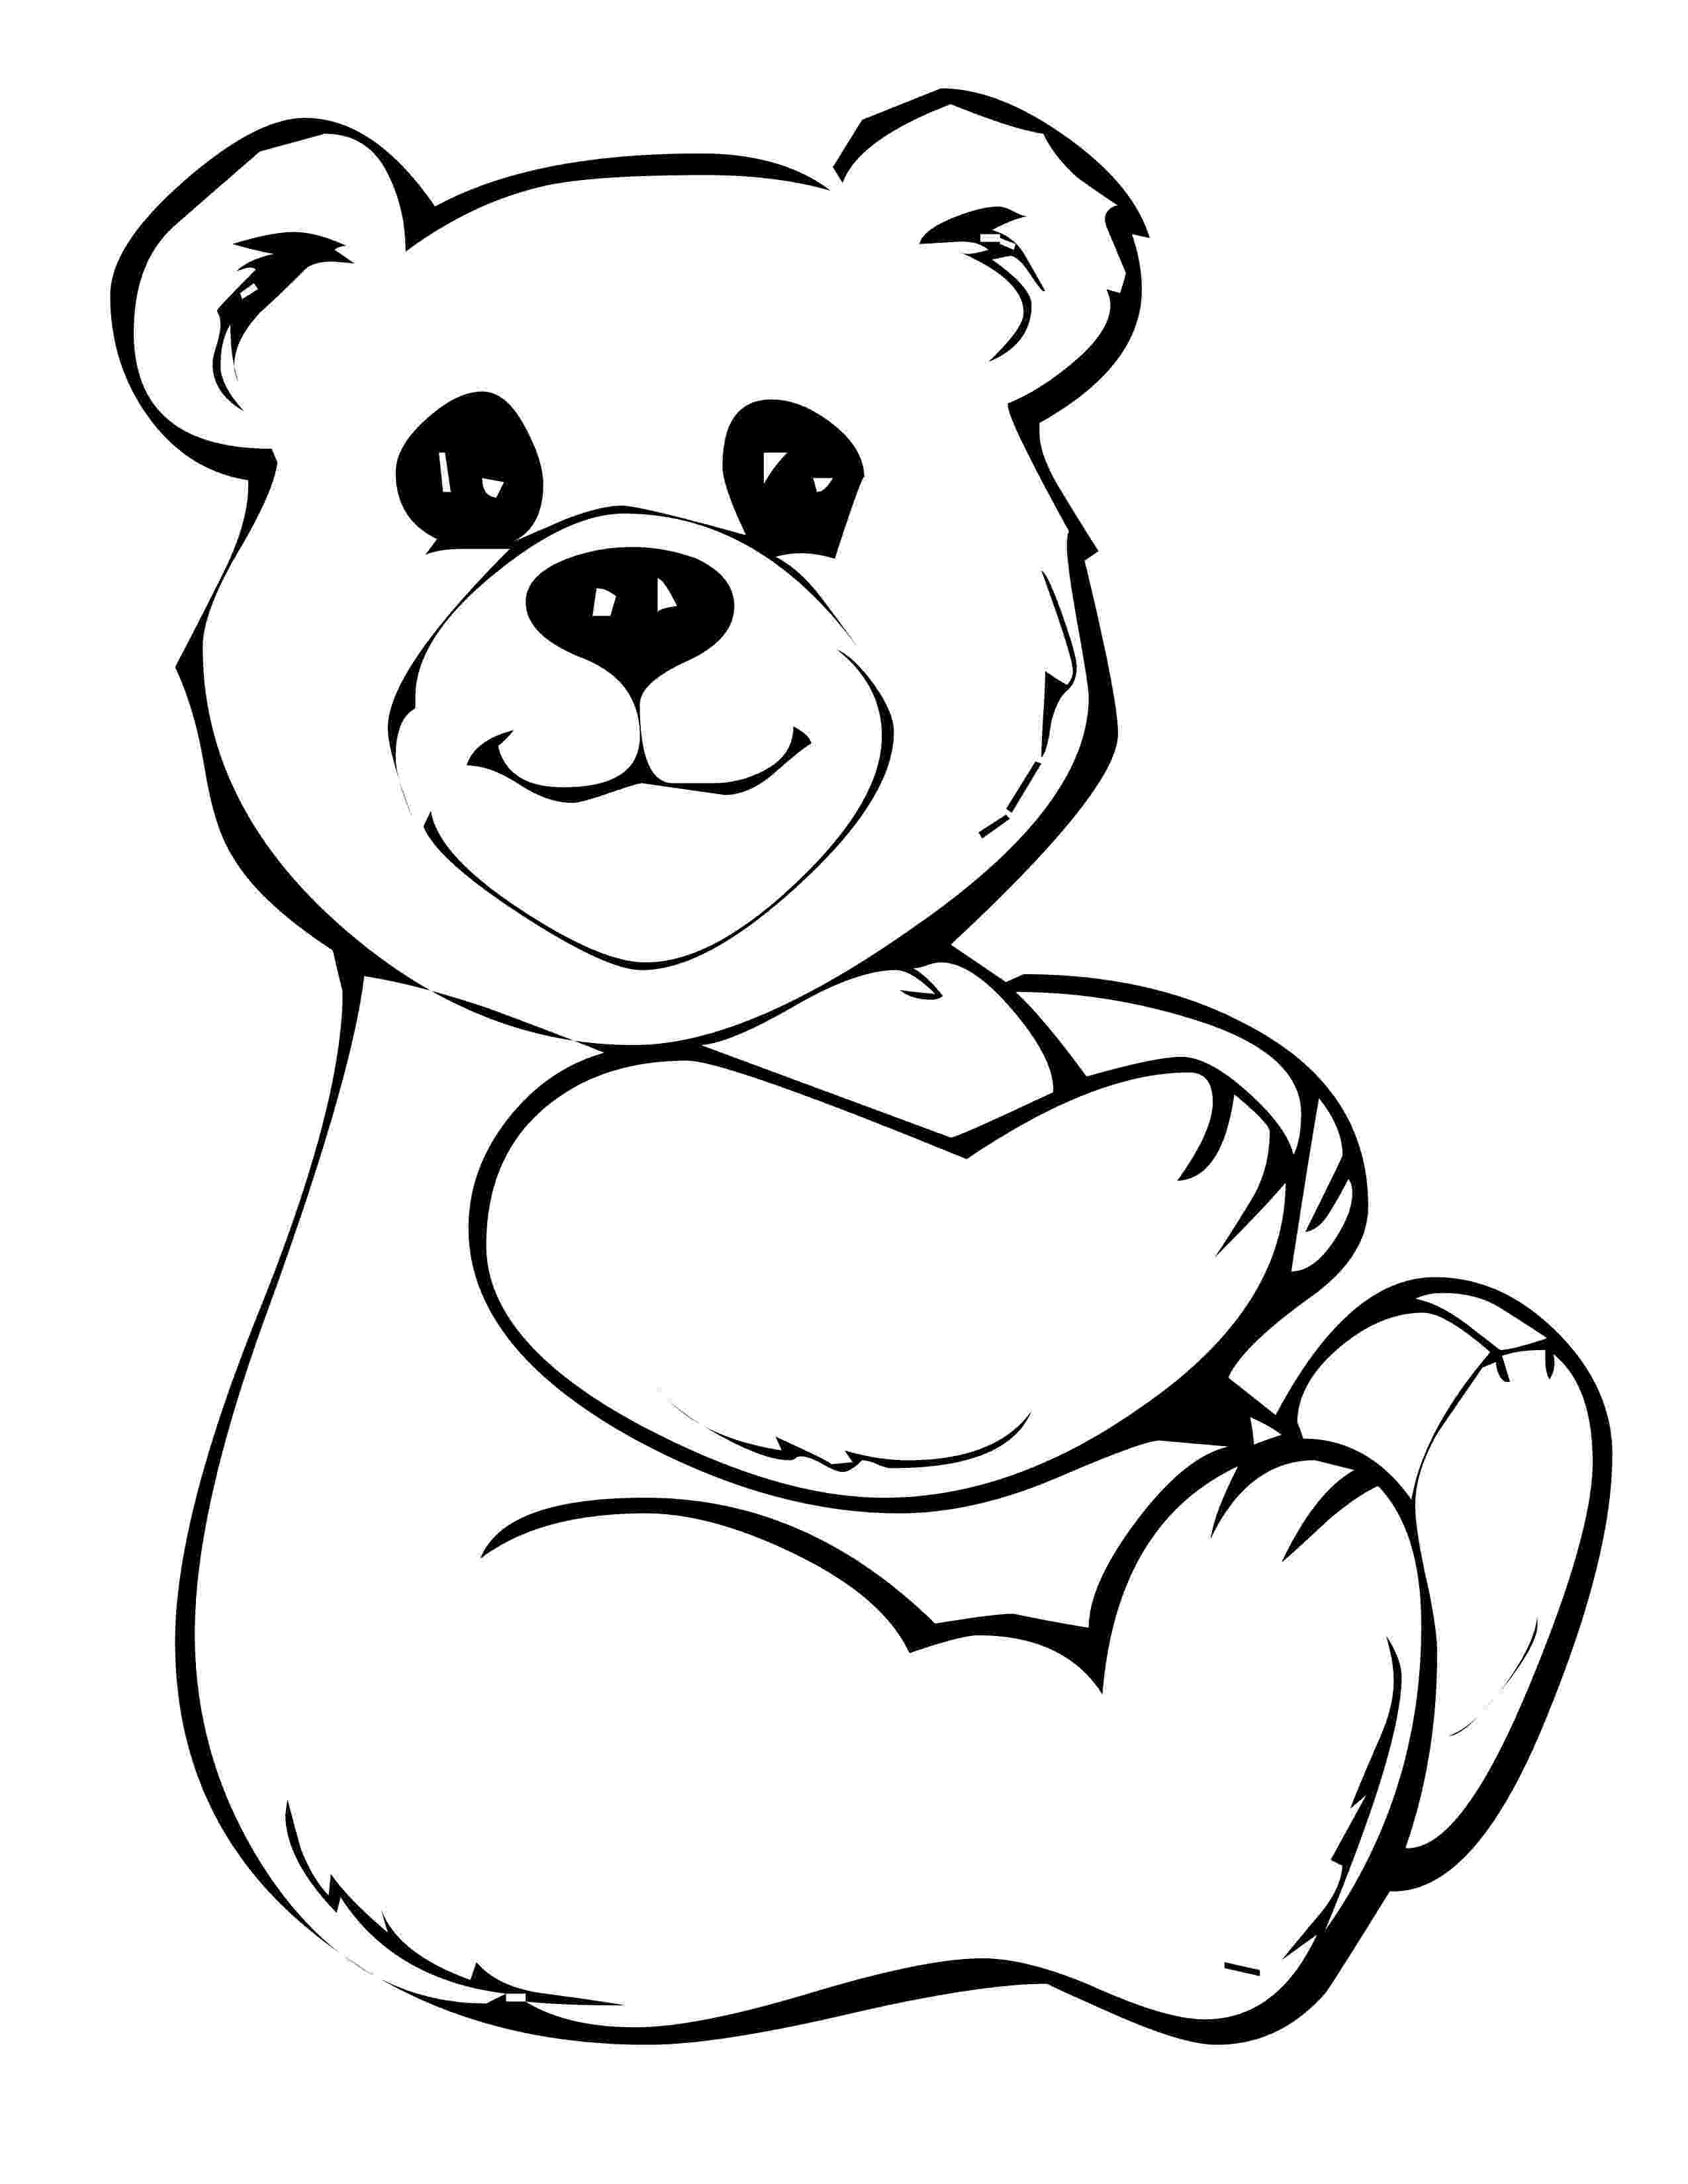 bear pictures to color free printable teddy bear coloring pages for kids color bear pictures to 